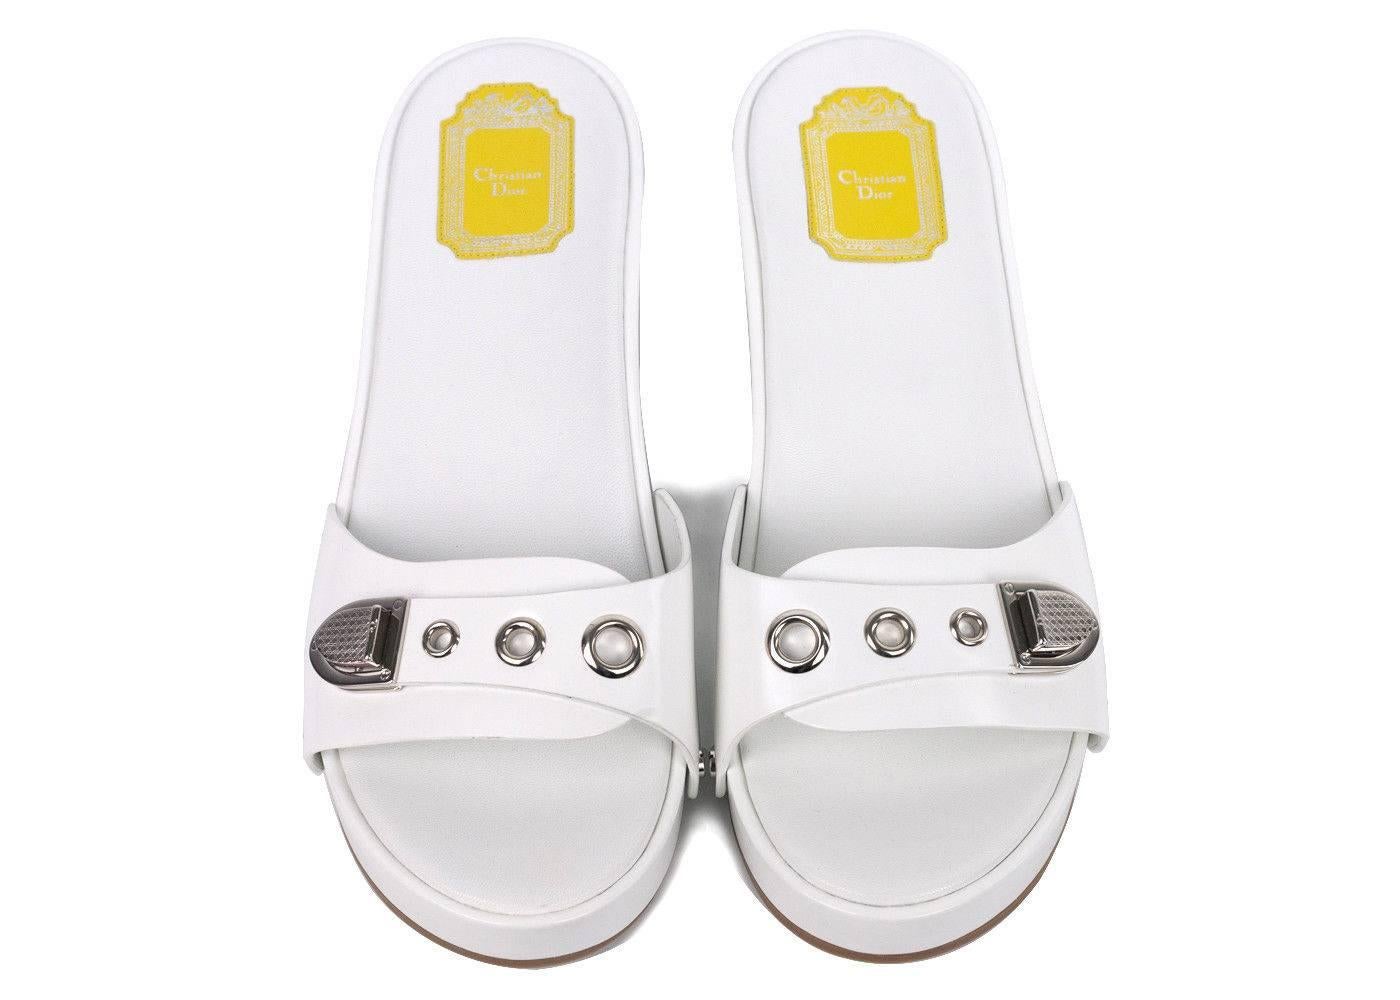 Dior's all white clogs for the incomng spring summer season. Pair these clogs with your favorite spring or summer dress or pair them with your favorite denim and top for a laid back street look this season.

Composition: Leather
Slip On